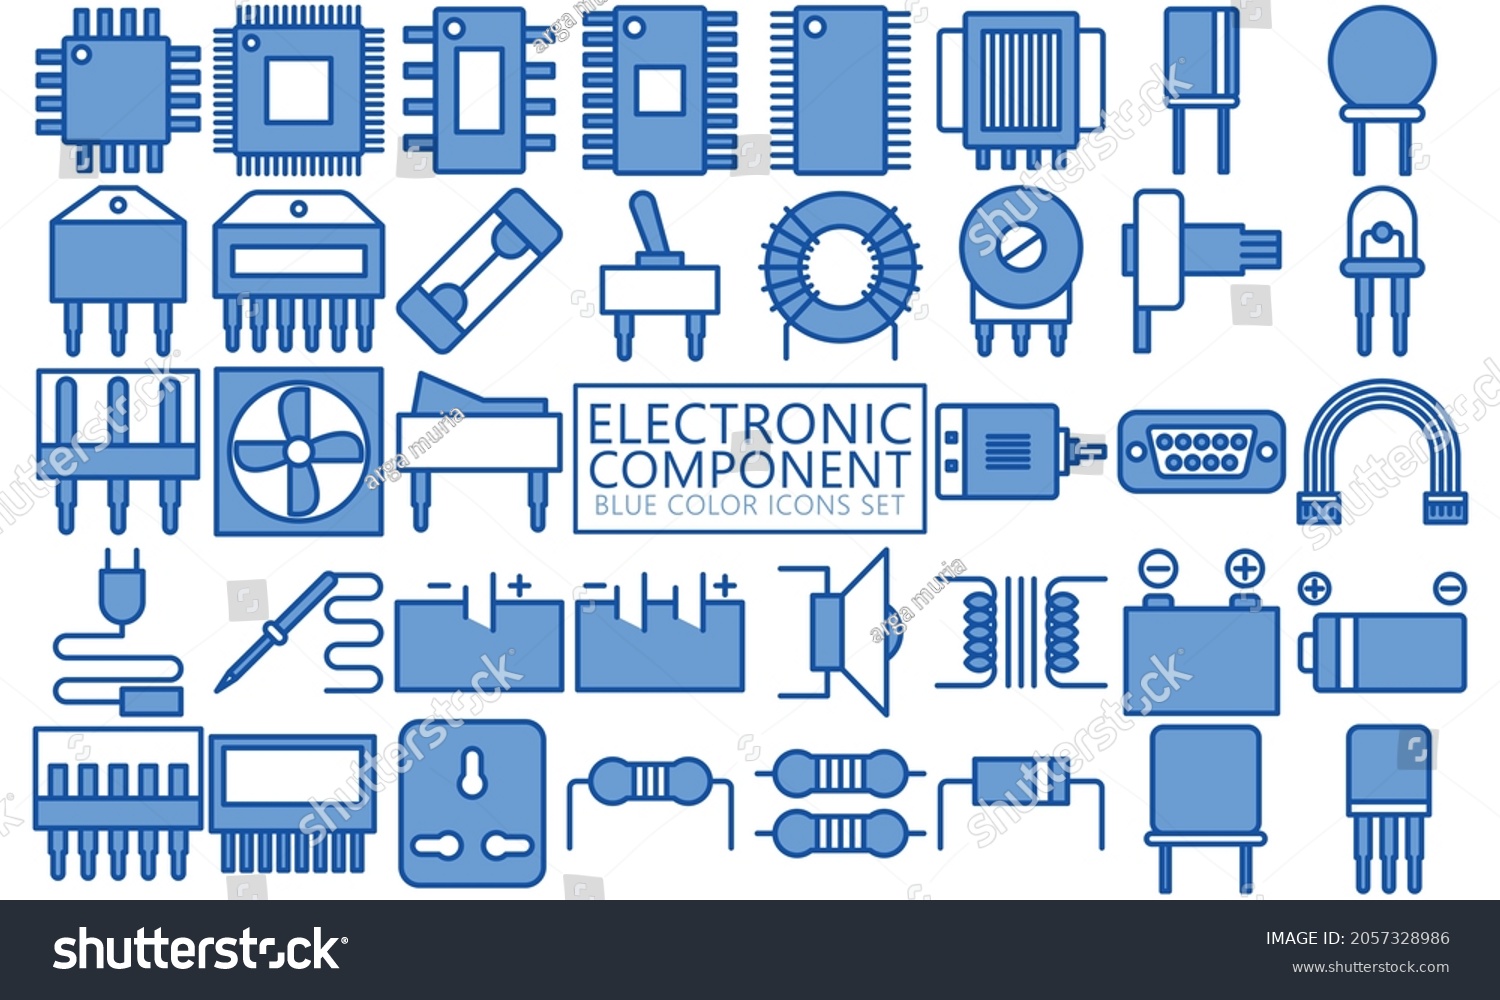 SVG of Electronic blue color icons set. chipset symbols, resistors, capacitors, transformers, diodes, batteries. Used for modern concepts, web, UI or UX kit and applications, EPS 10 ready convert to SVG svg